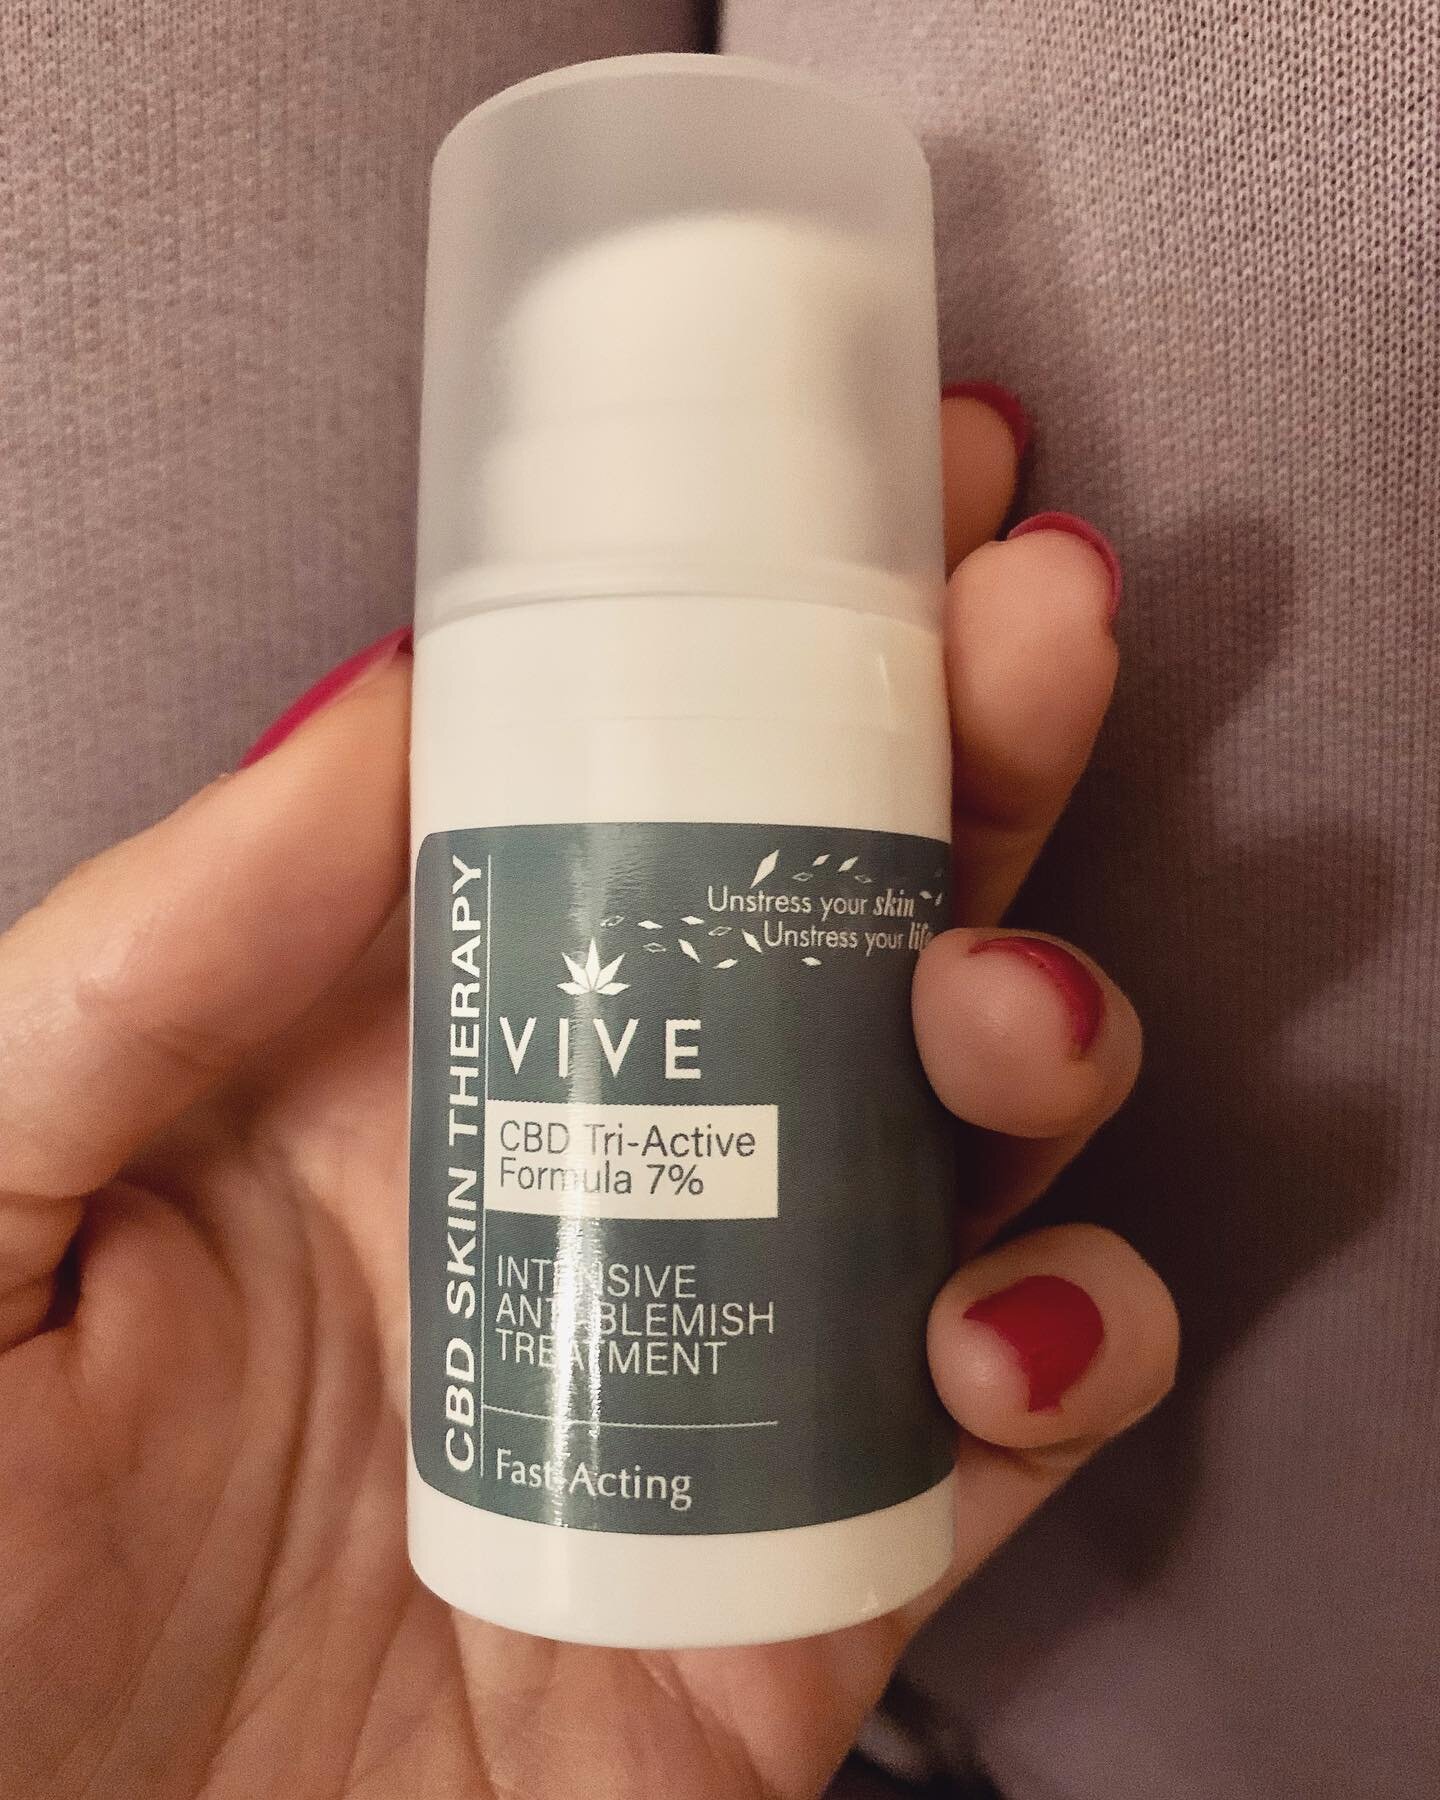 🤩 Weekend CBD product shout out 🤩

Intensive Anti-Blemish Treatment from @vivemybeauty 

Sorry guys, I&rsquo;m afraid this one is &pound;&pound;&pound; (&pound;60 😬 I only check prices after testing&hellip;) but it works! And to be fair, will last